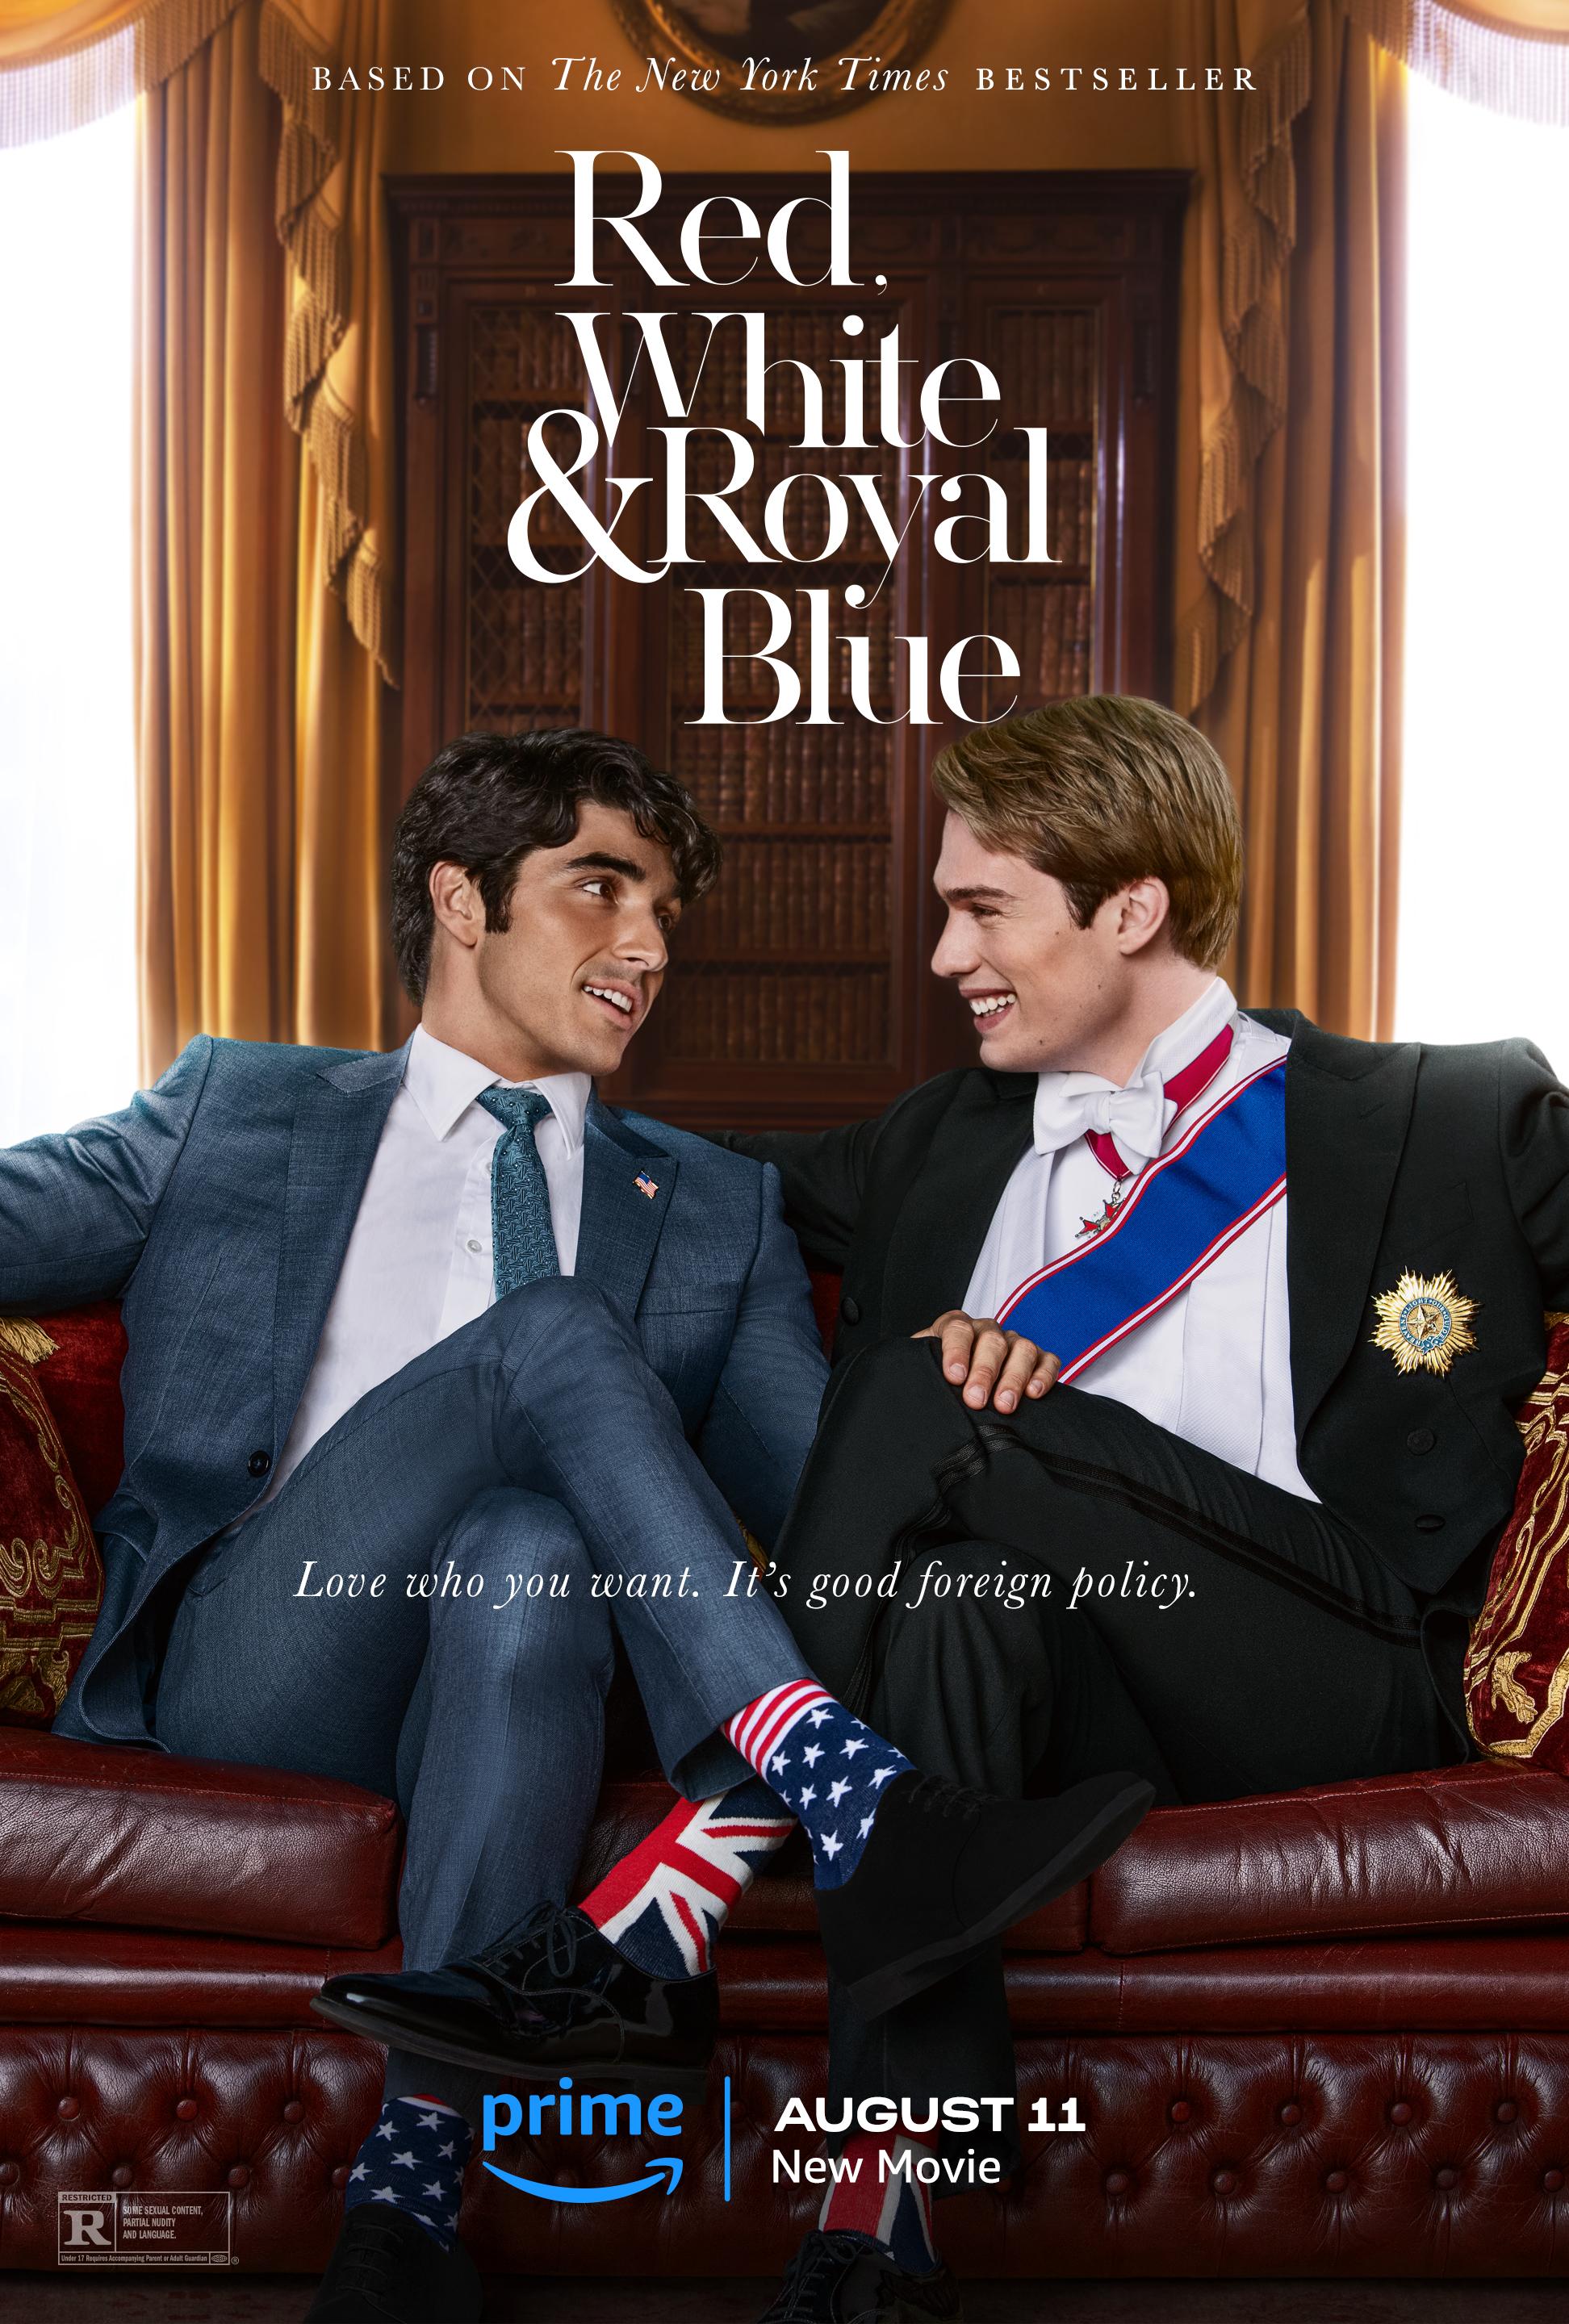 Red, White, and Royal Blue (Amazon Prime Video): Based on Casey McQuiston's 2019 novel, Red, White, and Royal Blue portrays a captivating love story between Henry, the son of the President of the United States, and Alex, a British prince.